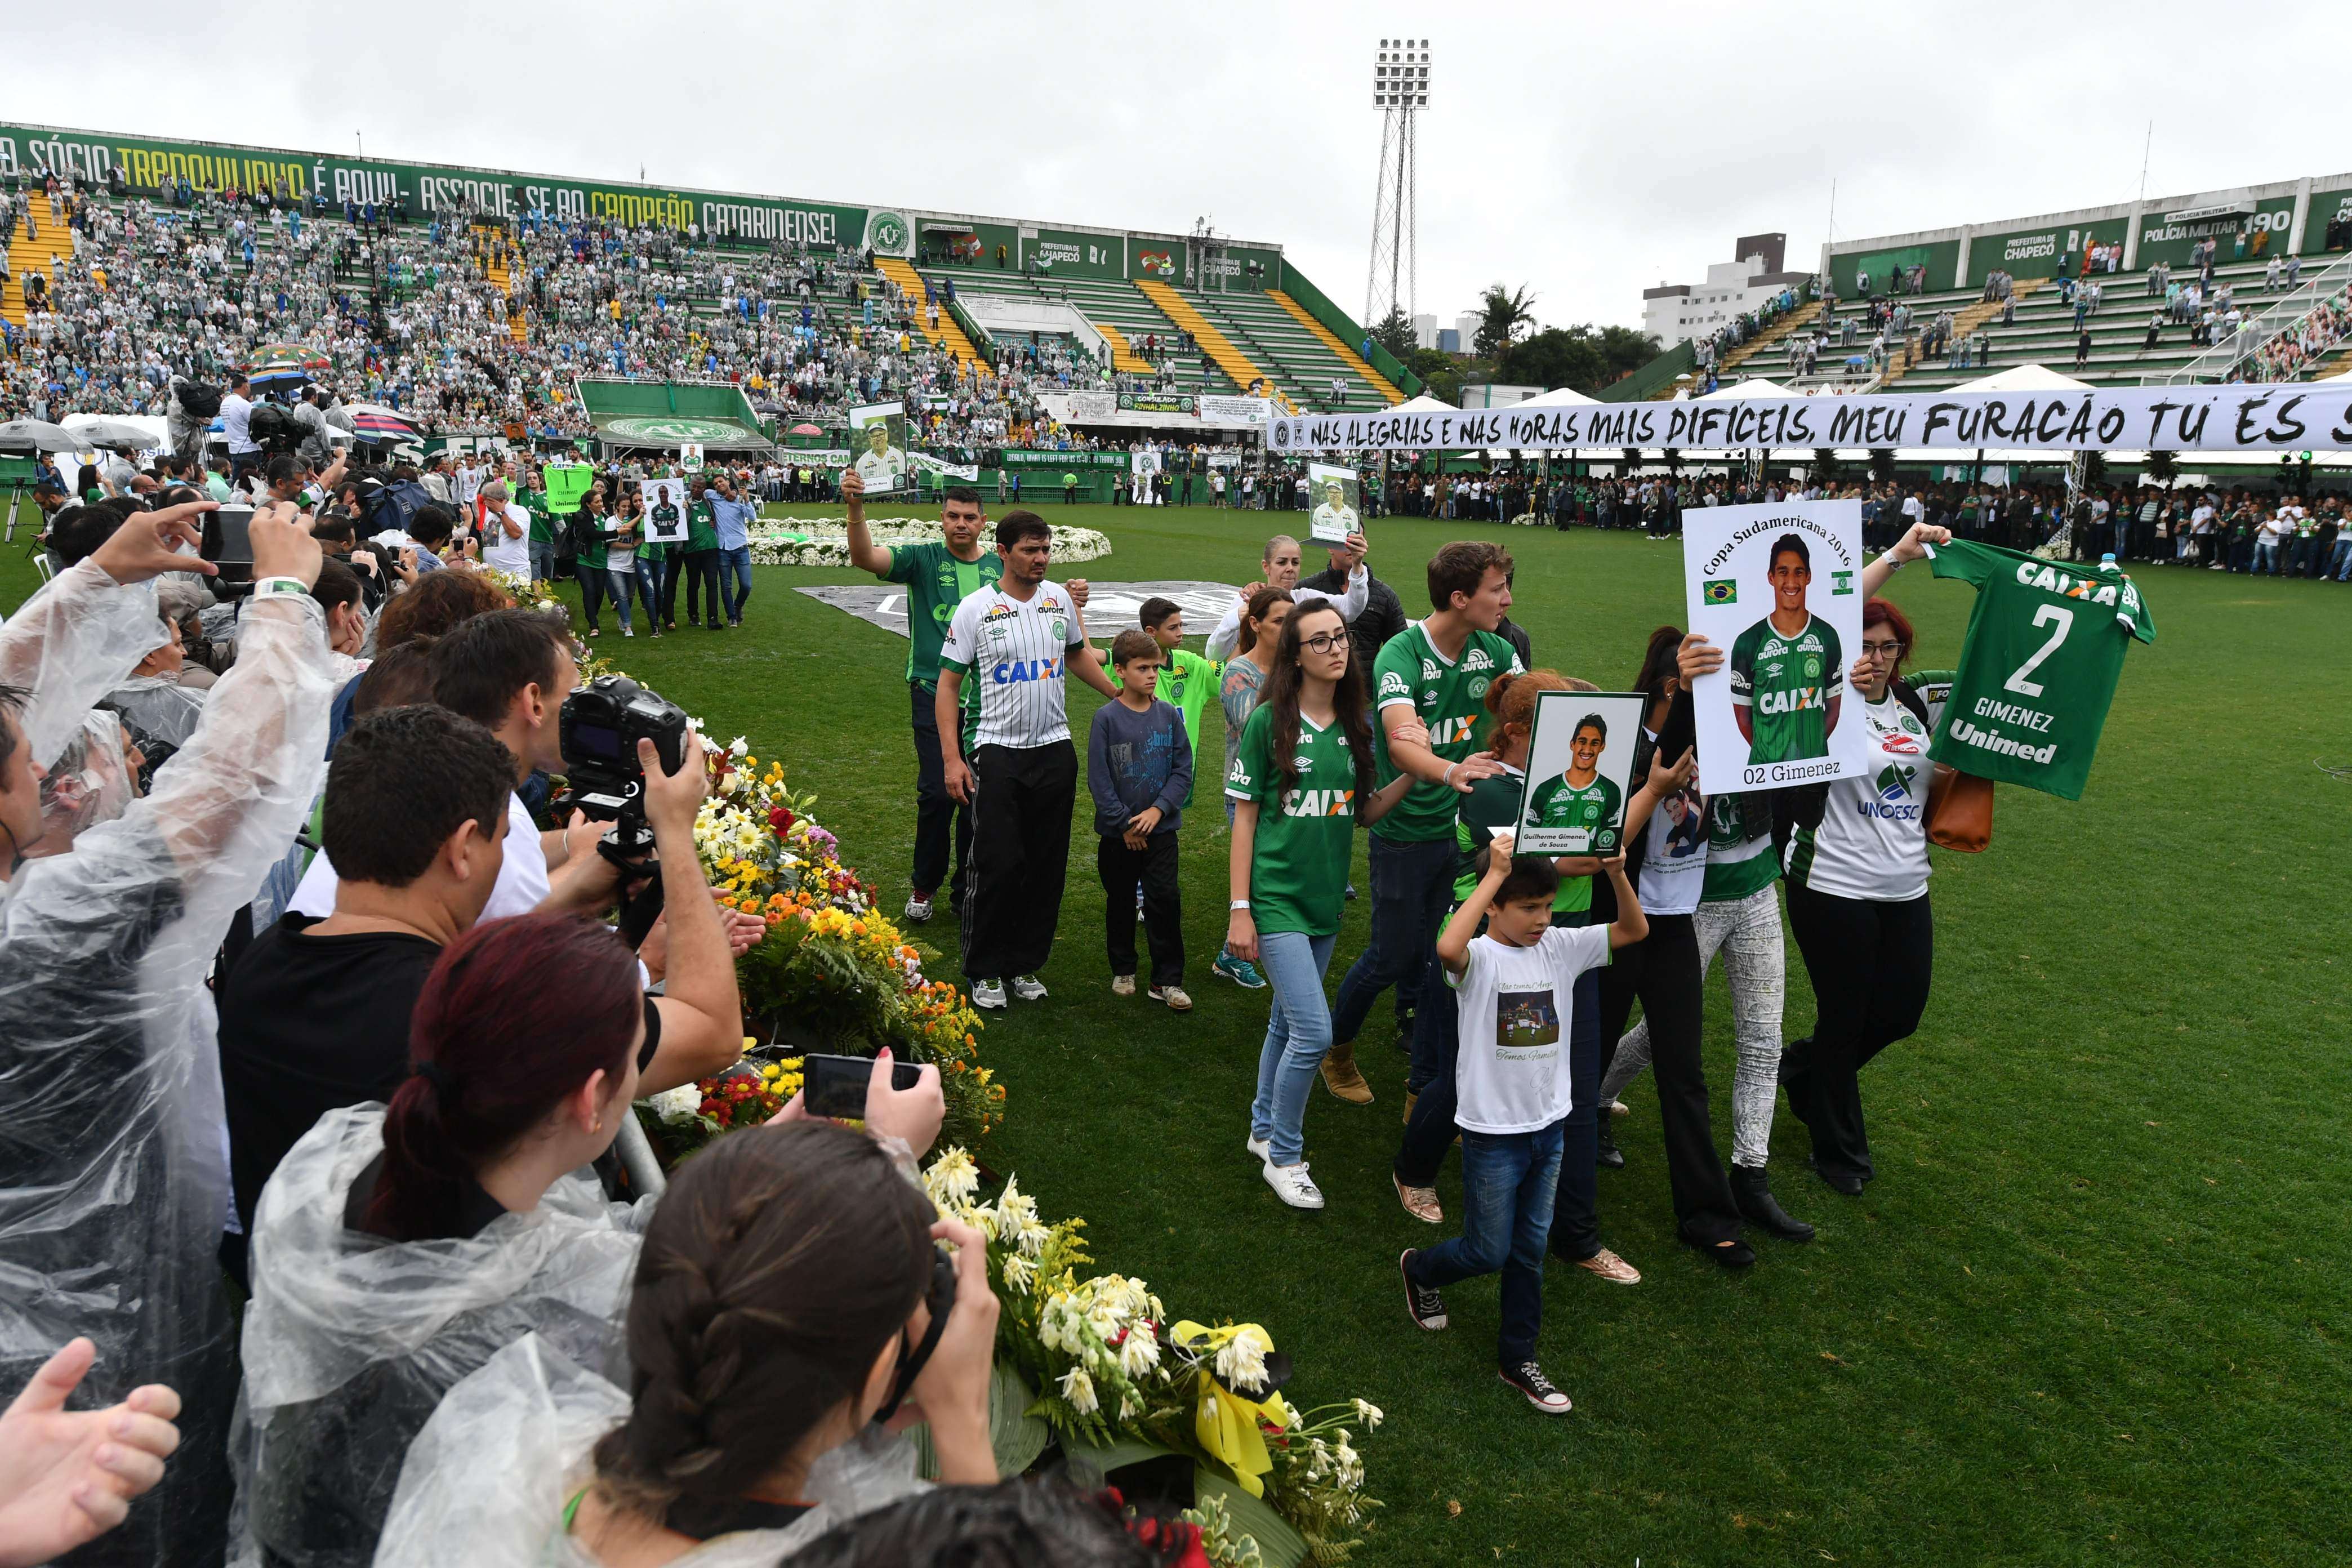 Relatives of the members of Chapecoense football club killed in a plane crash in Colombia enter the field during a funeral ceremony at the stadium in Chapeco, Santa Catarina, southern Brazil. Photo: AFP